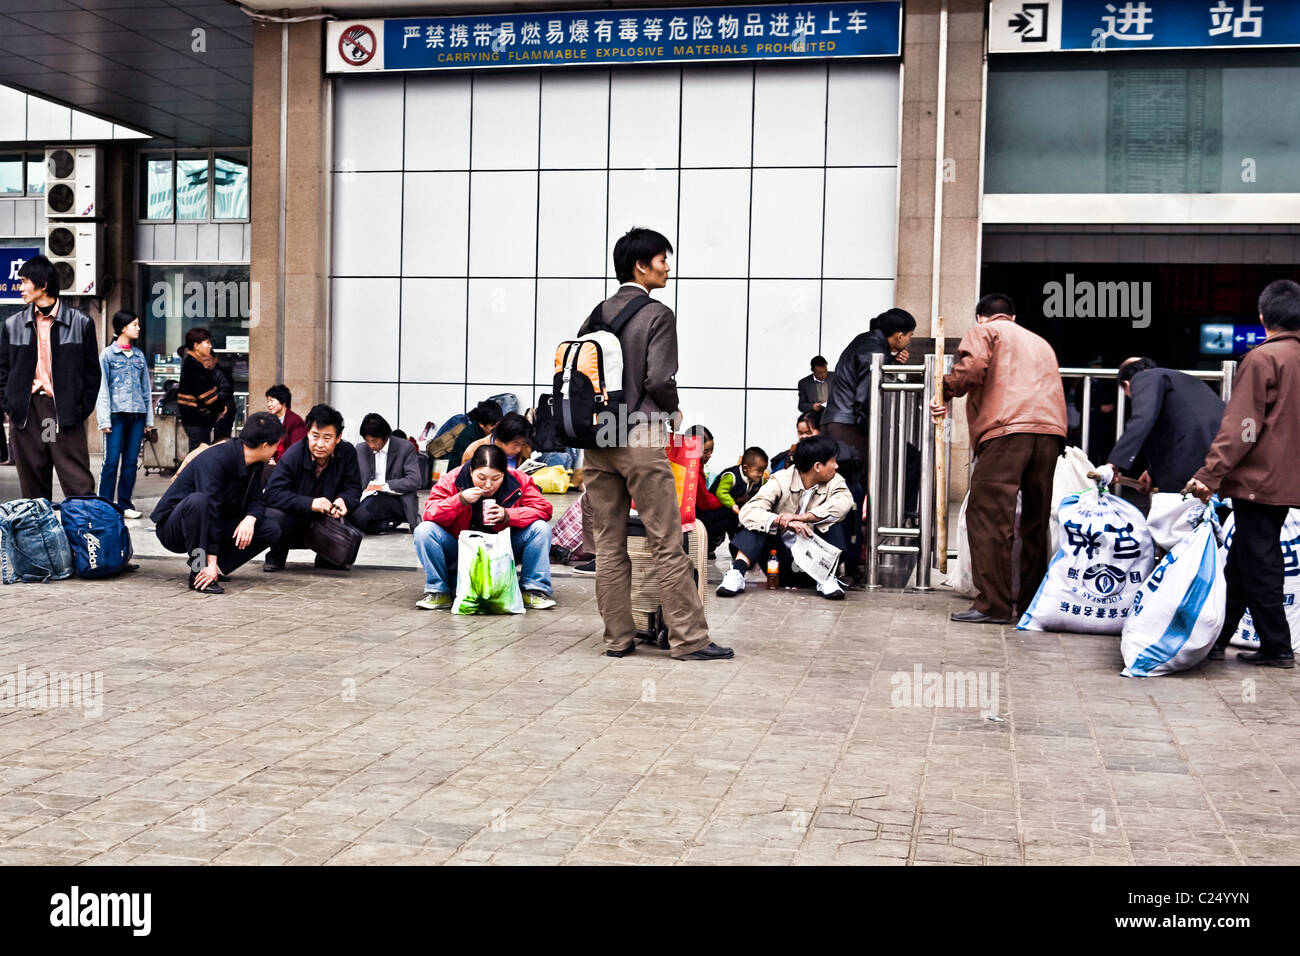 CHINA, WUHAN: Travelers with backpacks and luggage waiting outside the Hankou Railway Station in Wuhan as others clear security. Stock Photo